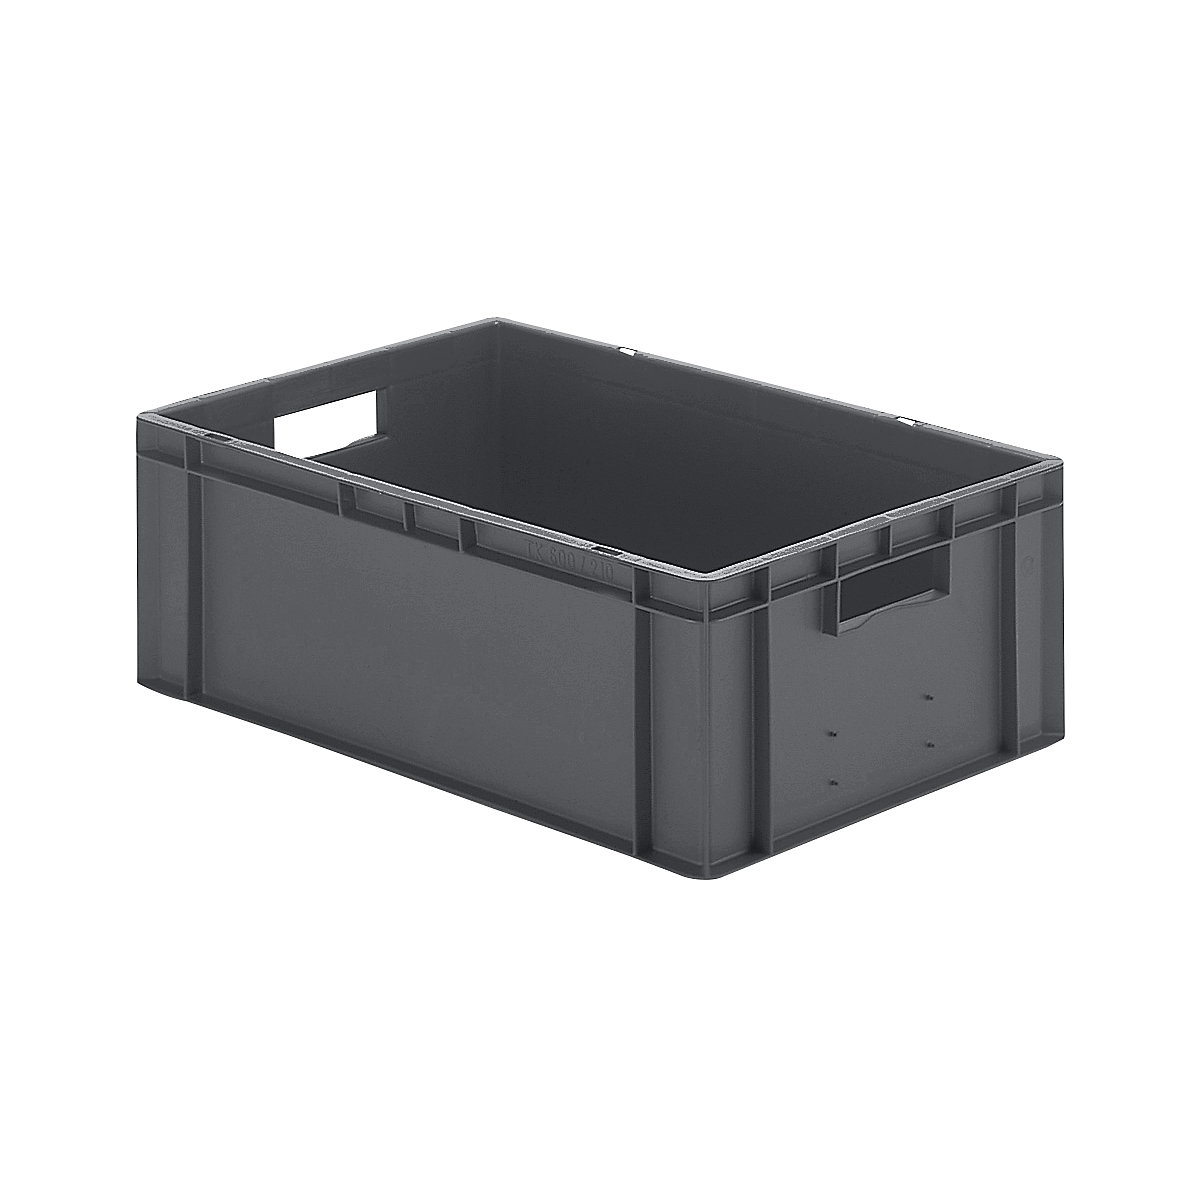 Euro stacking container, closed walls and base, LxWxH 600 x 400 x 210 mm, grey, pack of 5